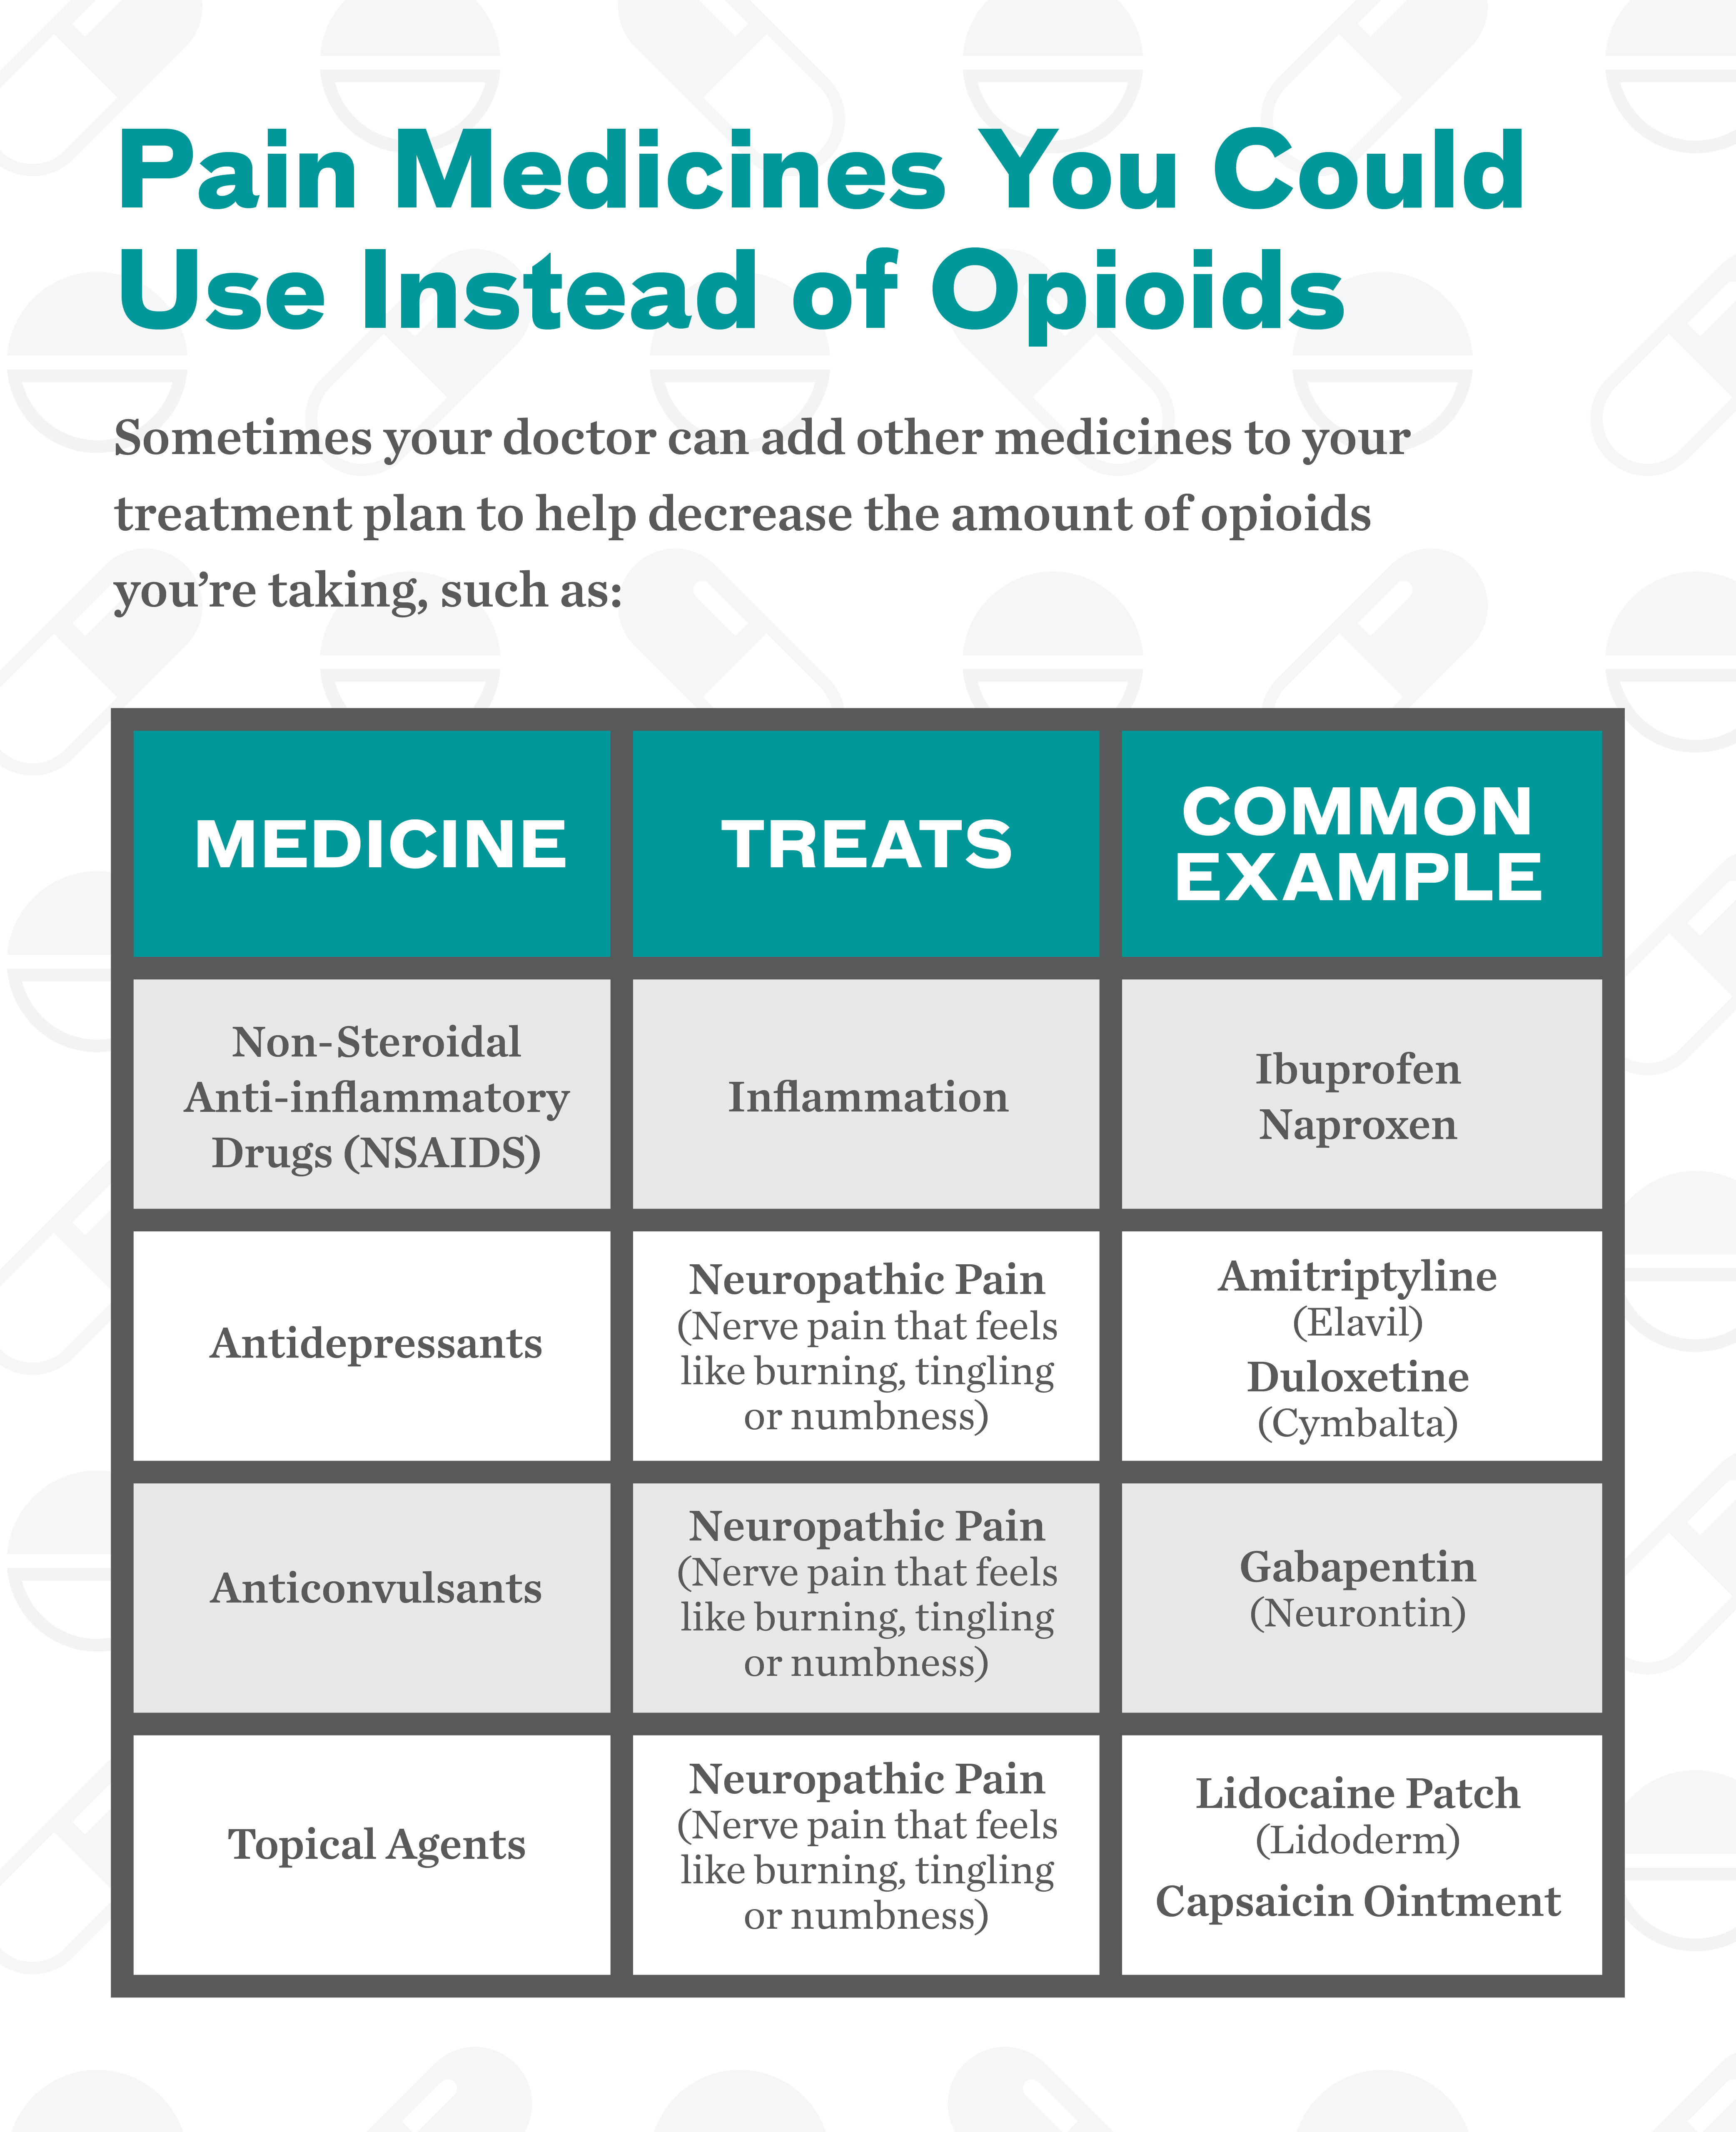 Did you know there are ways to manage your pain besides taking opioids? Some alternatives include taking less strong opioid medicines or receiving body therapy, such as massages. 